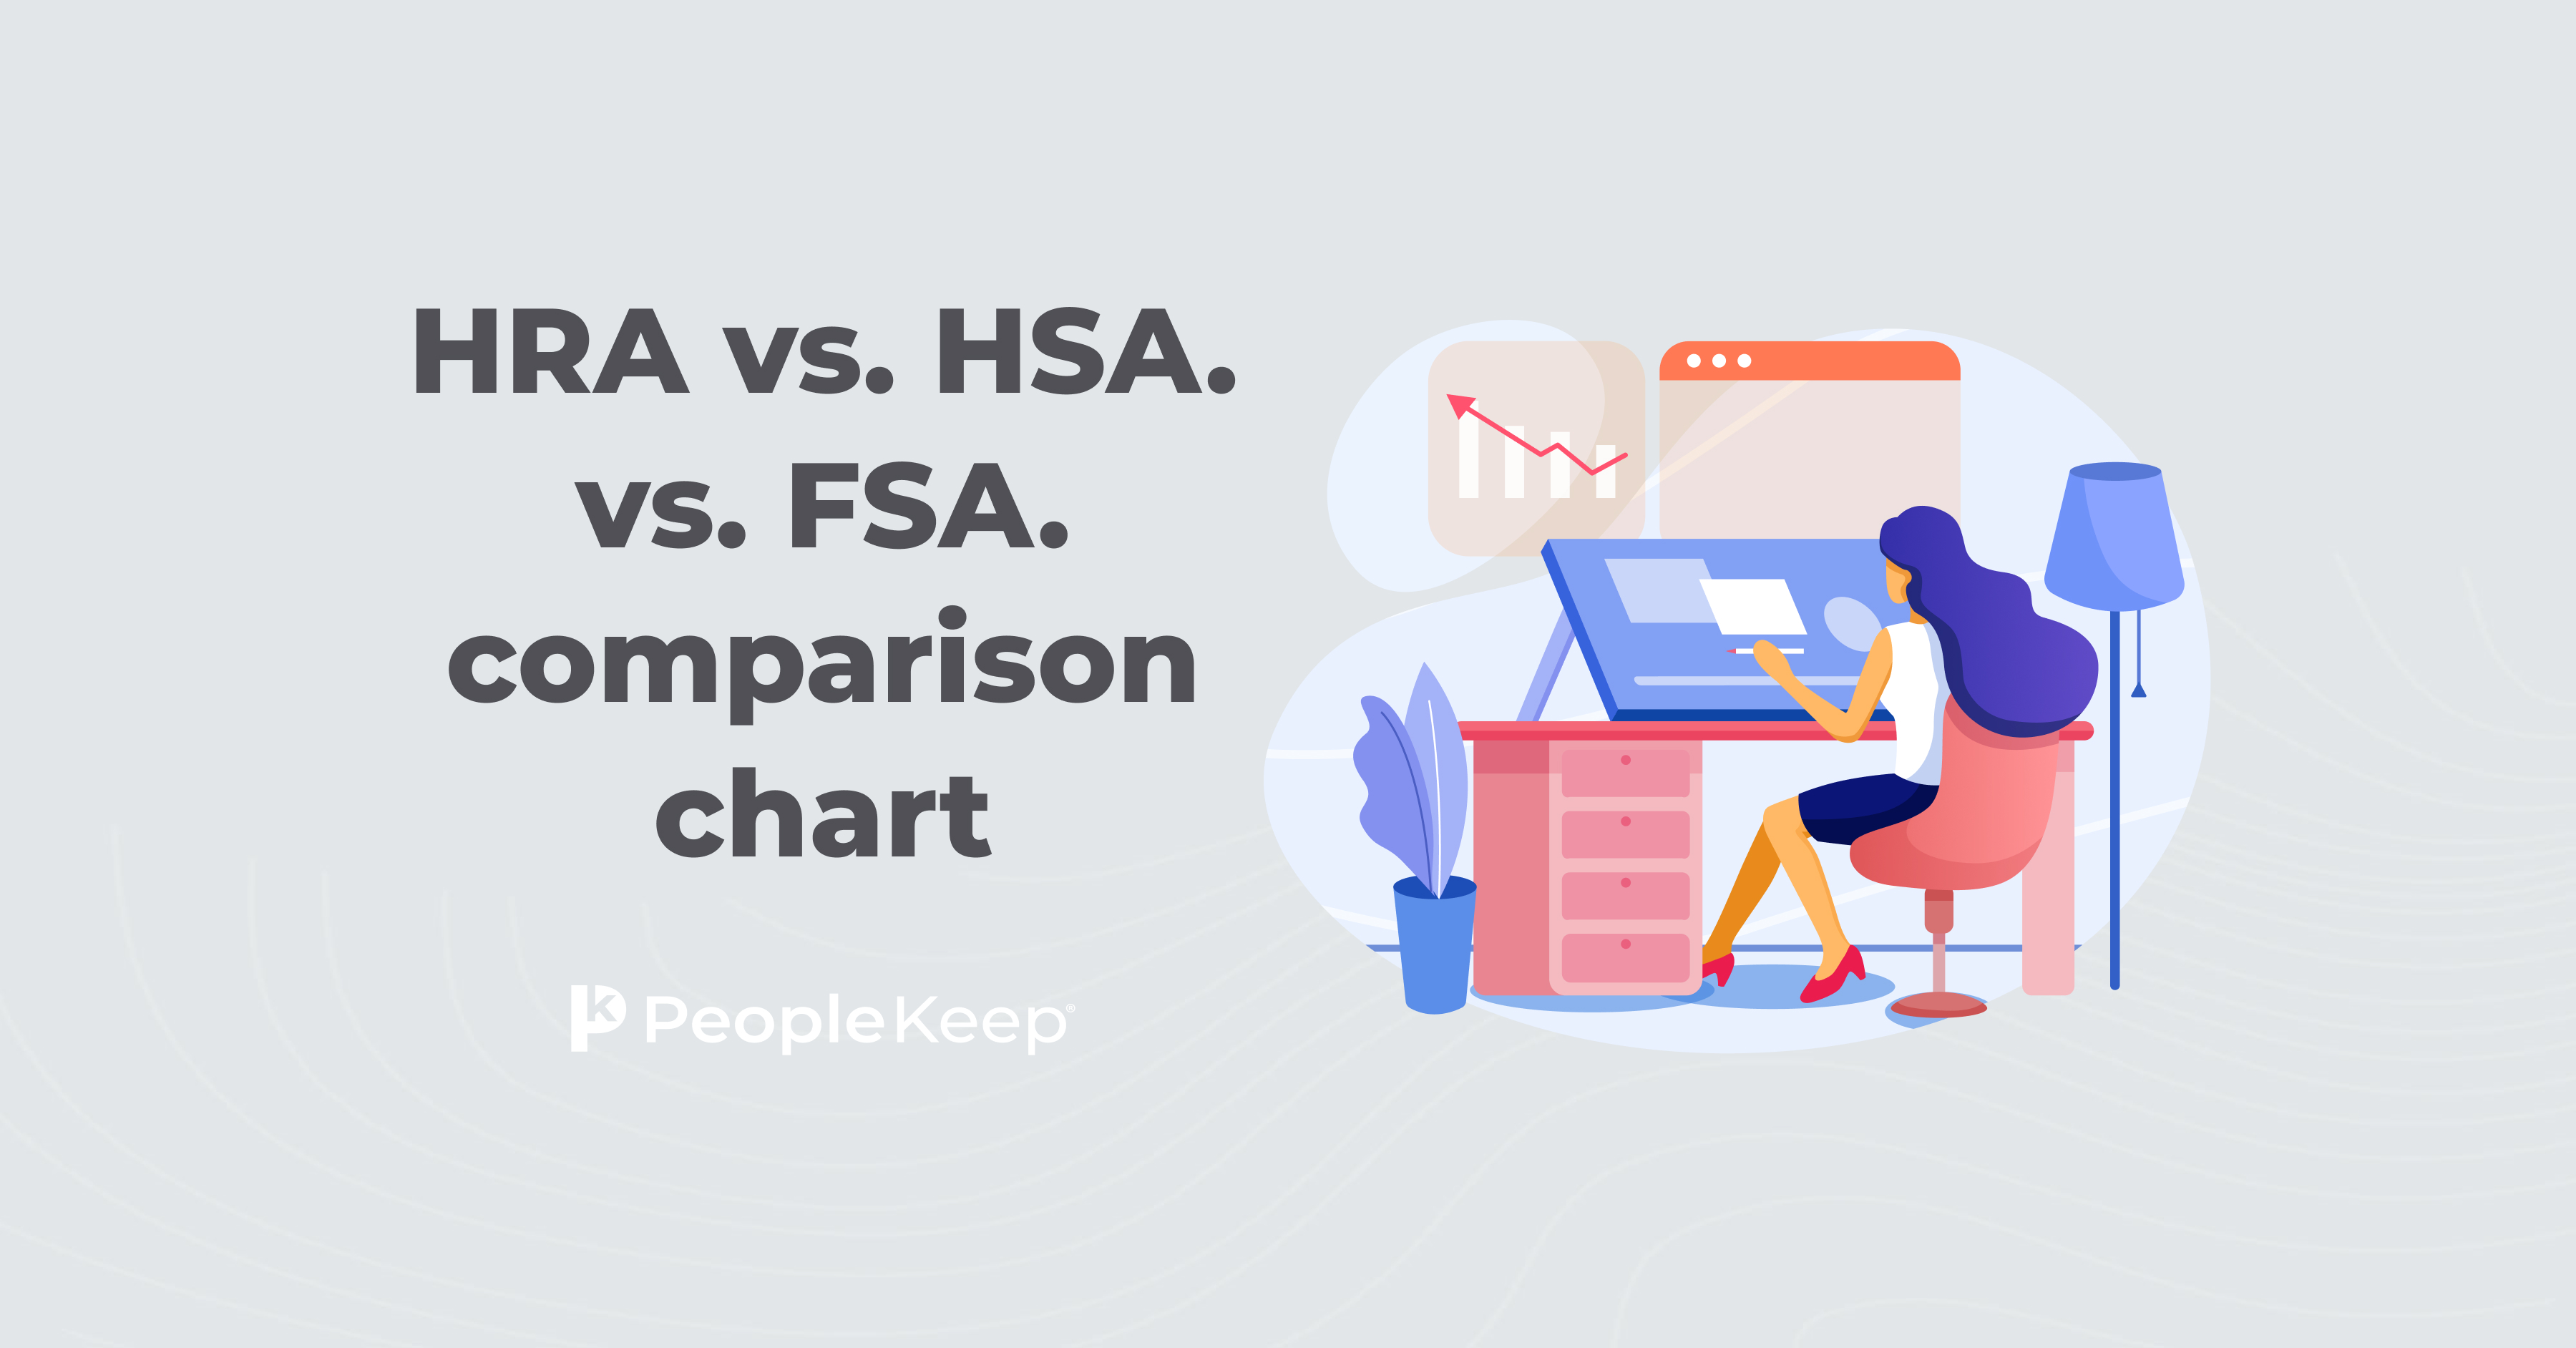 What Are The Differences Between HSA, HRA, and FSA? - GO Imaging